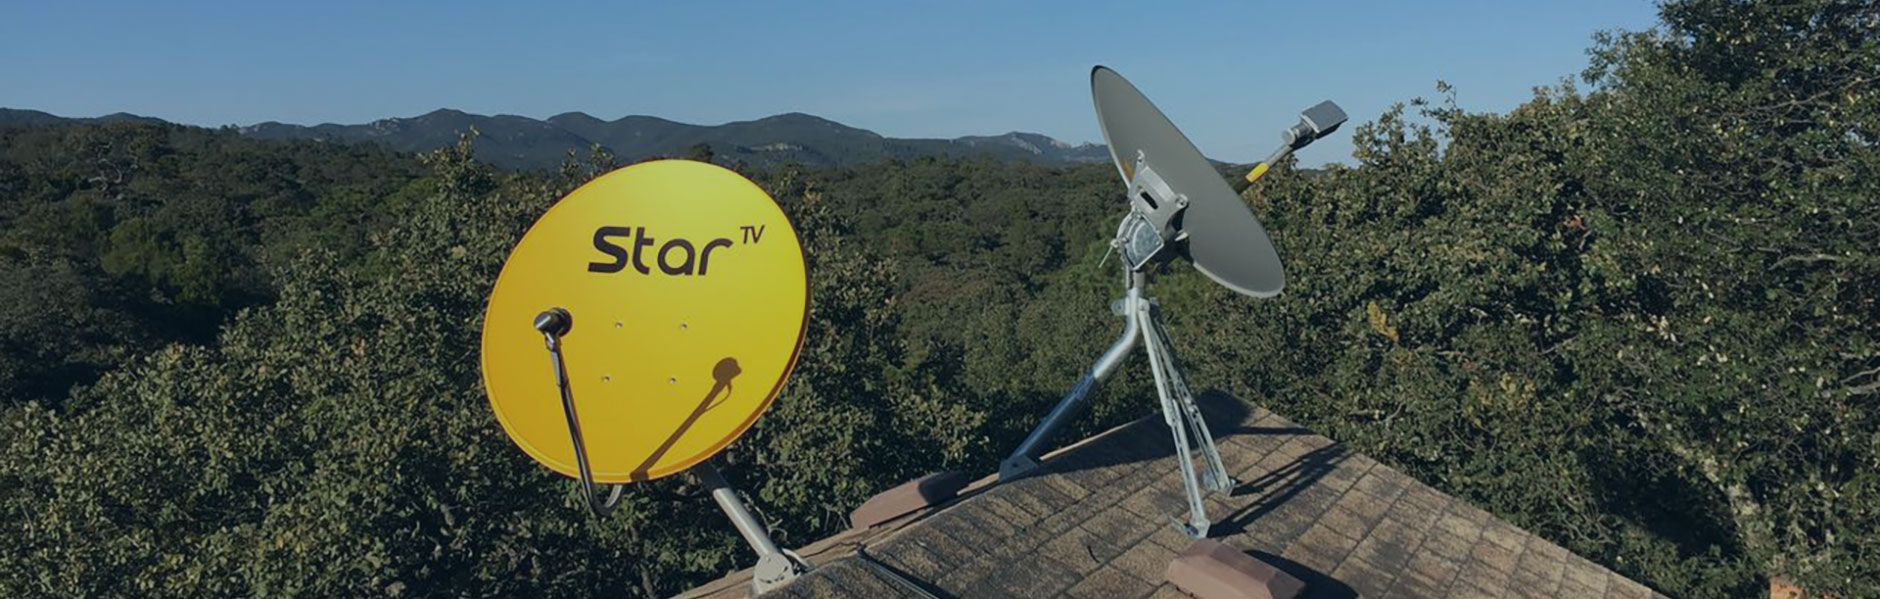 StarTV, a high-quality, affordable service for millions of homes